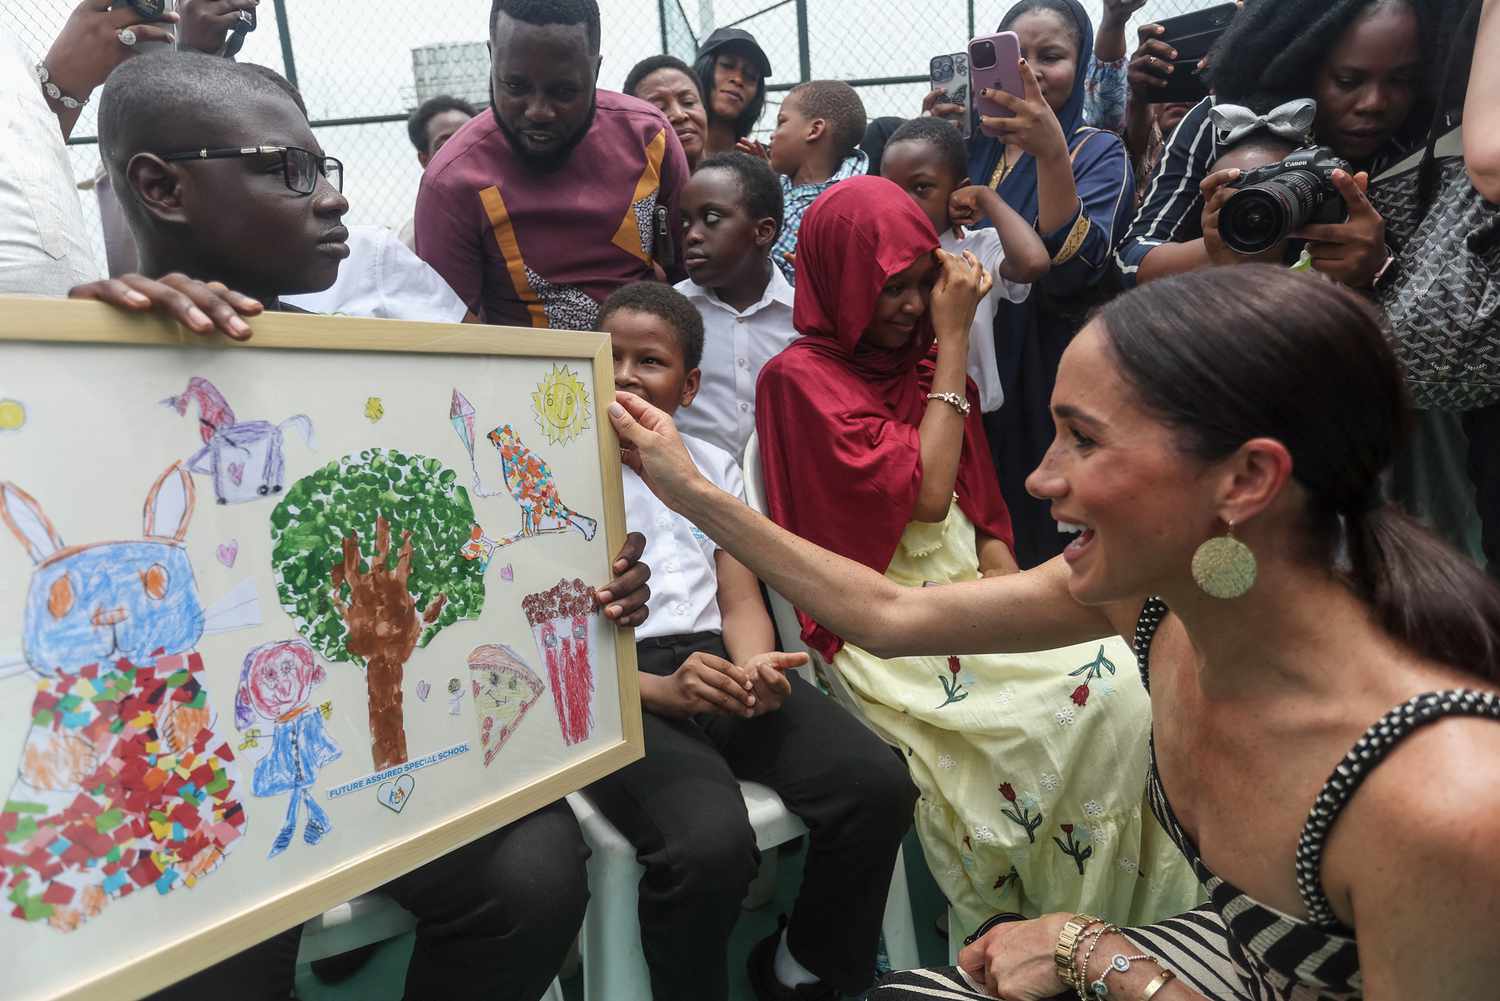 Meghan Markle Welcomed Into Nigerian Community During Emotional Reception: 'Our Daughter, Our Friend'